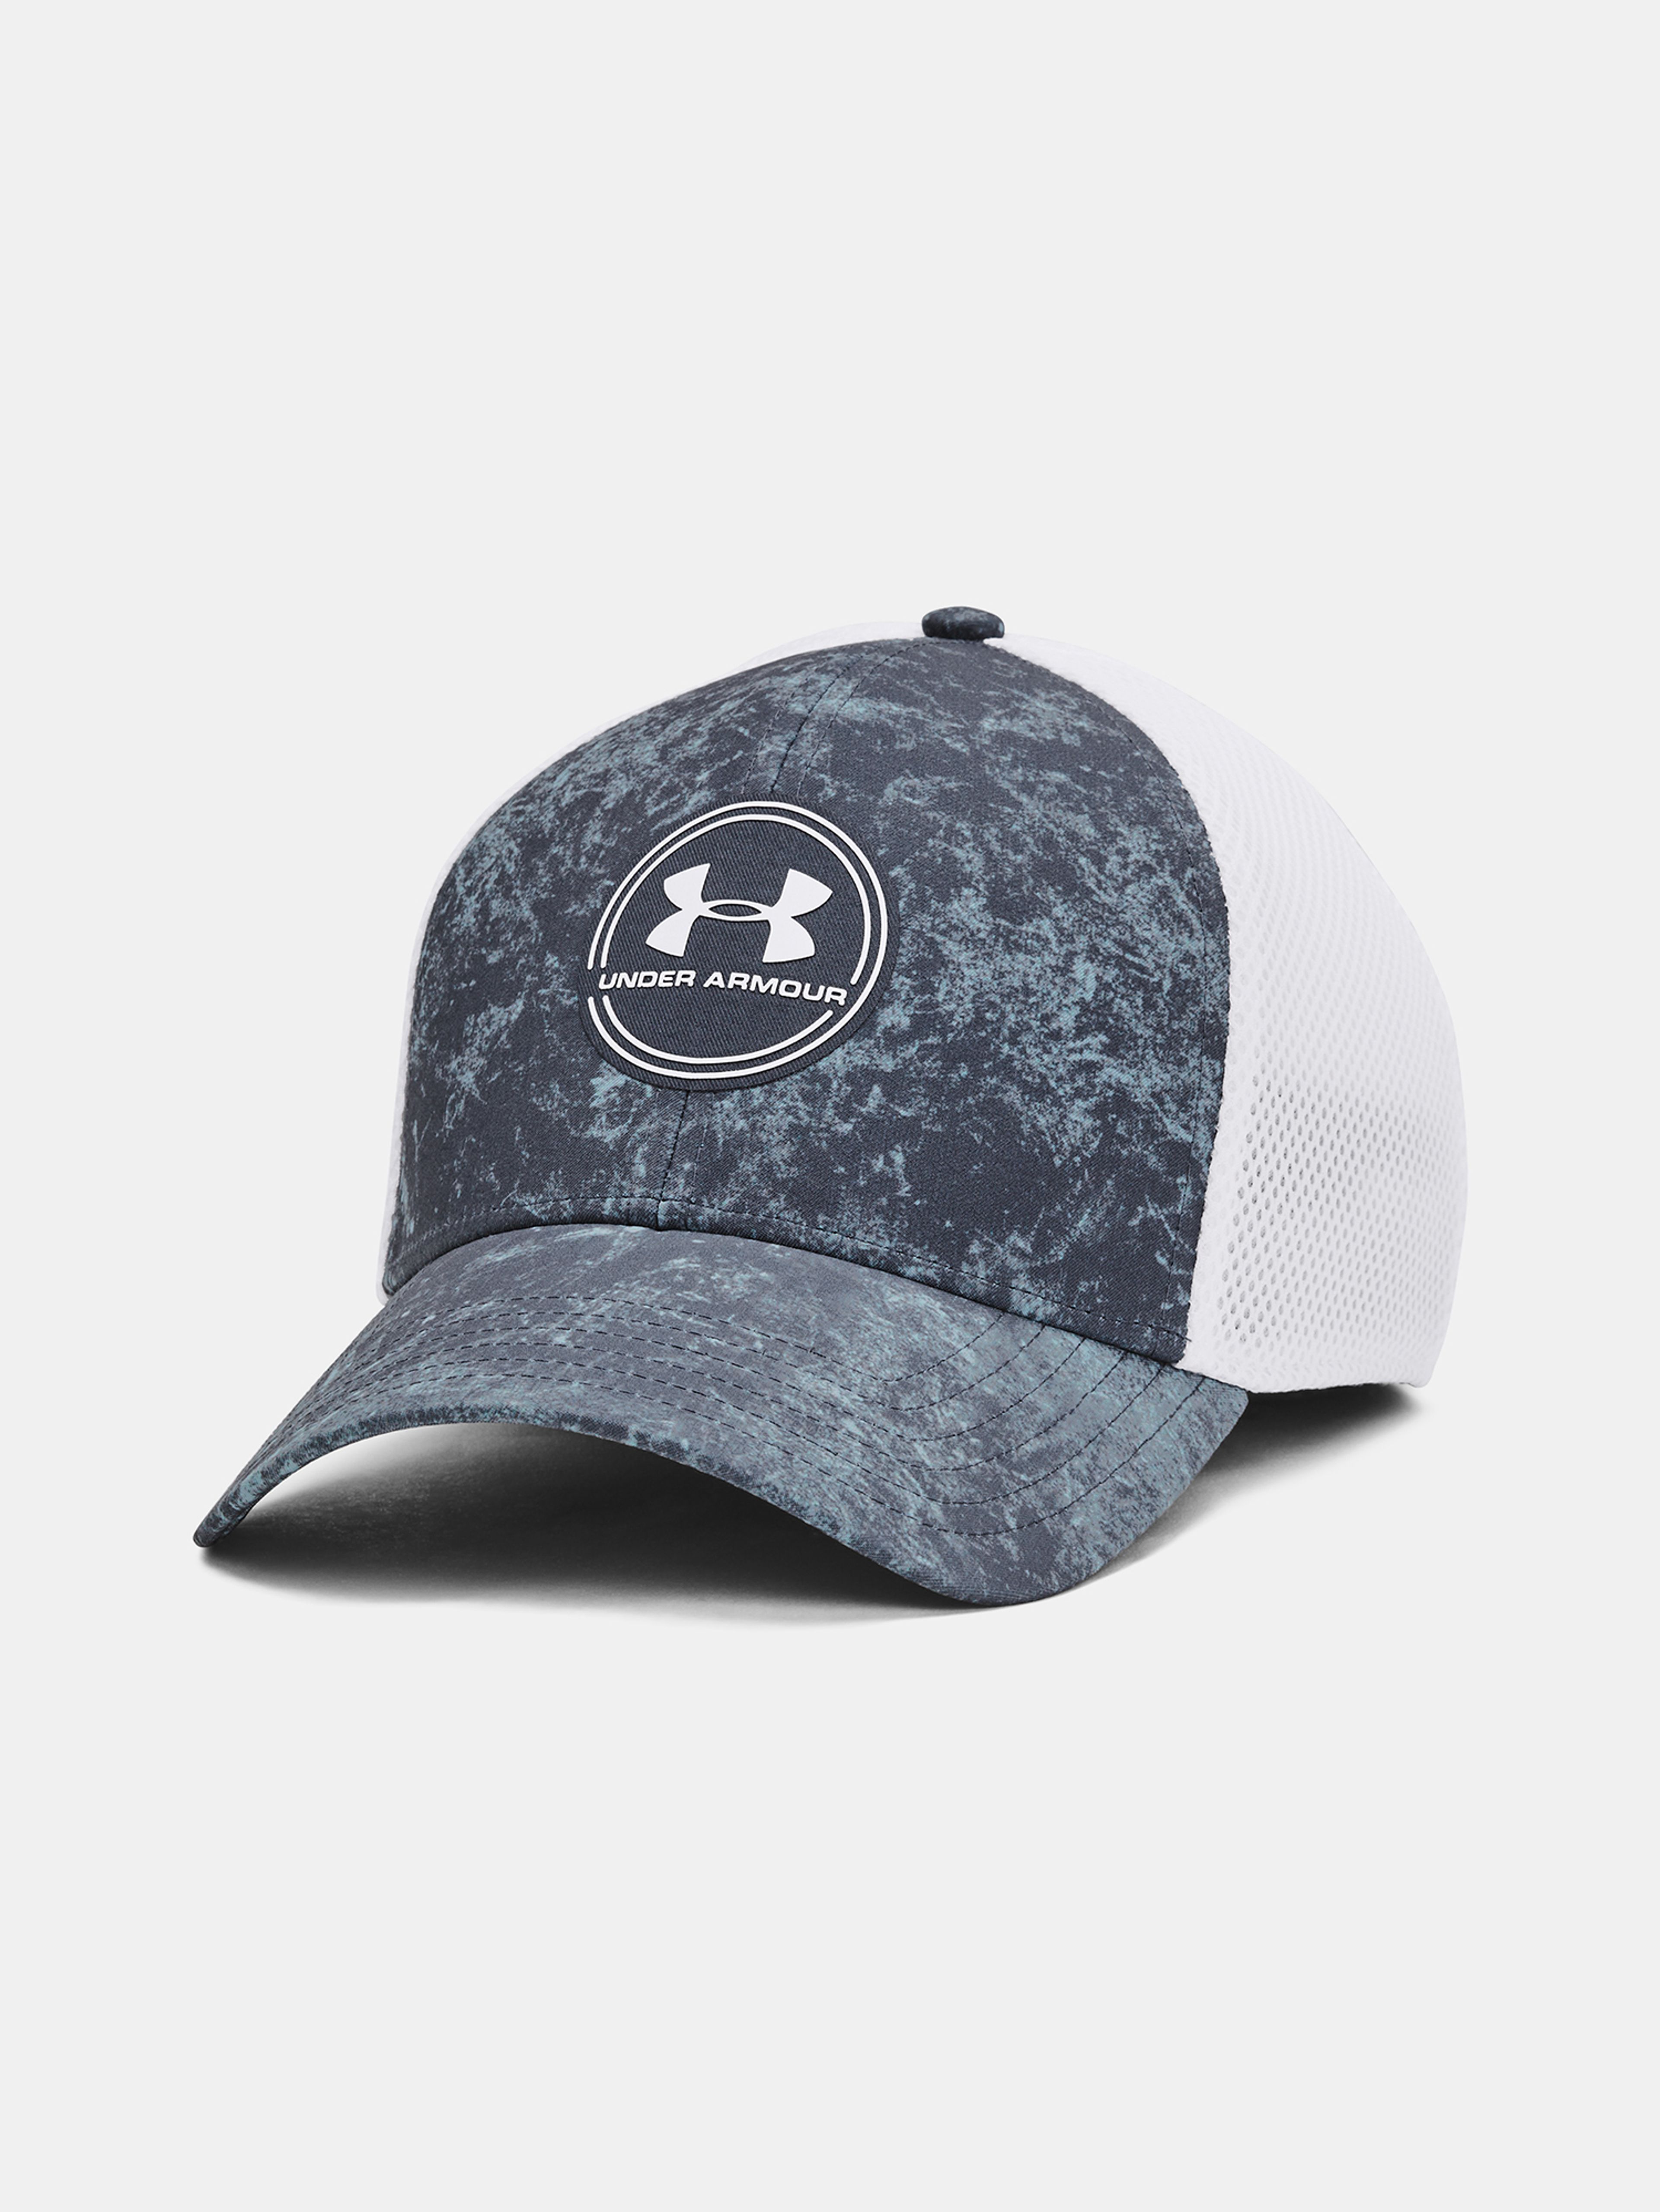 Under Armour Iso-chill Driver Mesh-GRY baseball sapka